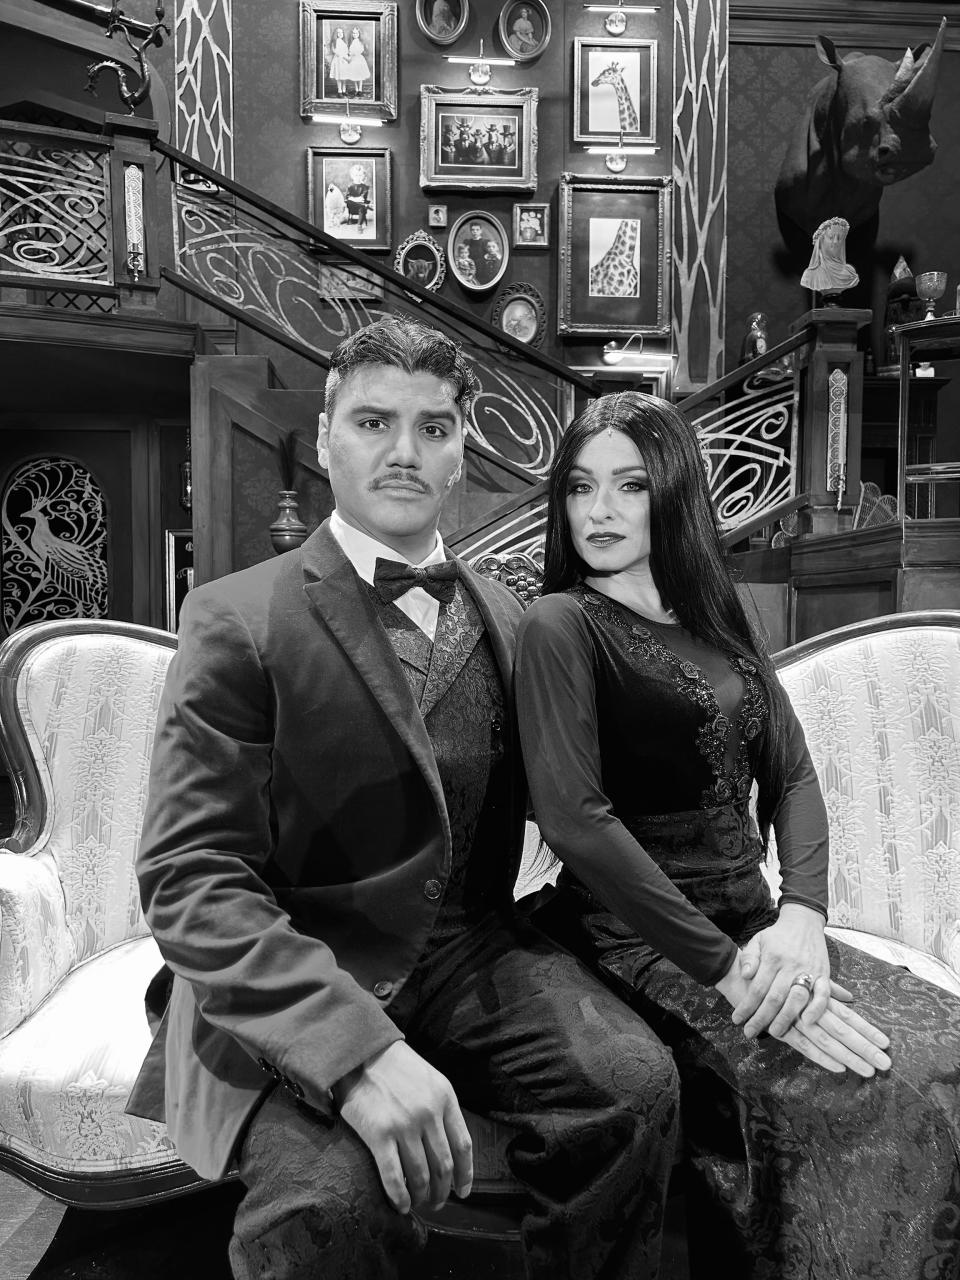 Jared Sierra plays "Gomez" and Mahalia Gronigan plays "Morticia" in the musical "The Addams Family," on stage at the Henegar Center through Oct. 22, 2023. Visit henegarcenter.com.